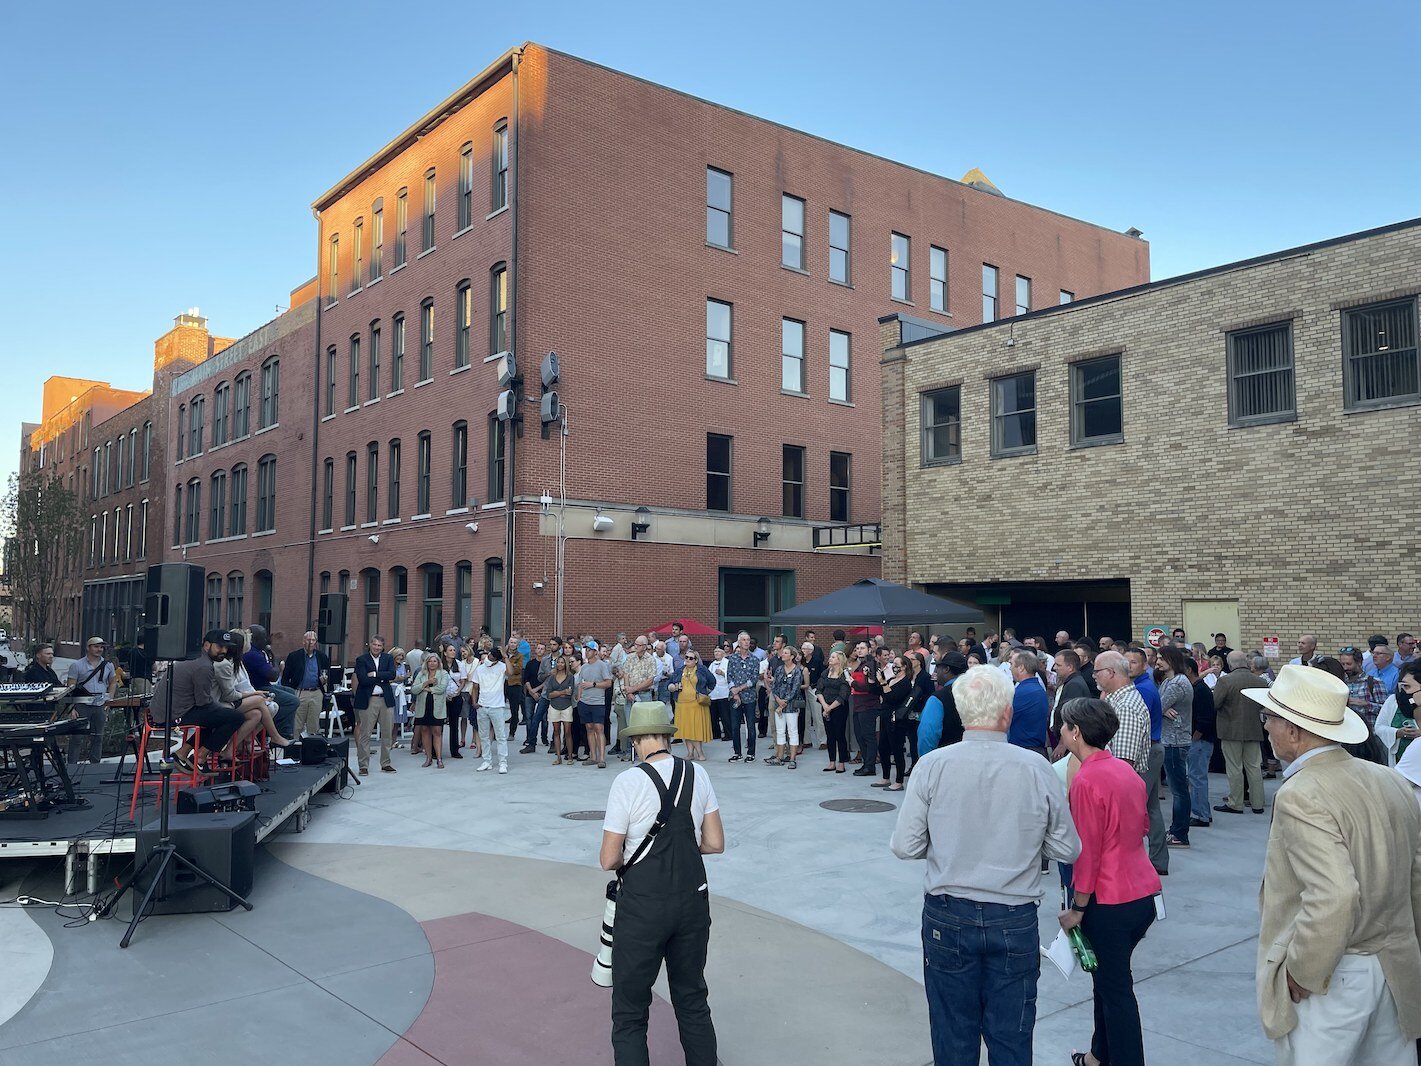 About 80 to 90 people turned out to learn about plans for the new Haymarket Plaza and placemaking in downtown Kalamazoo.